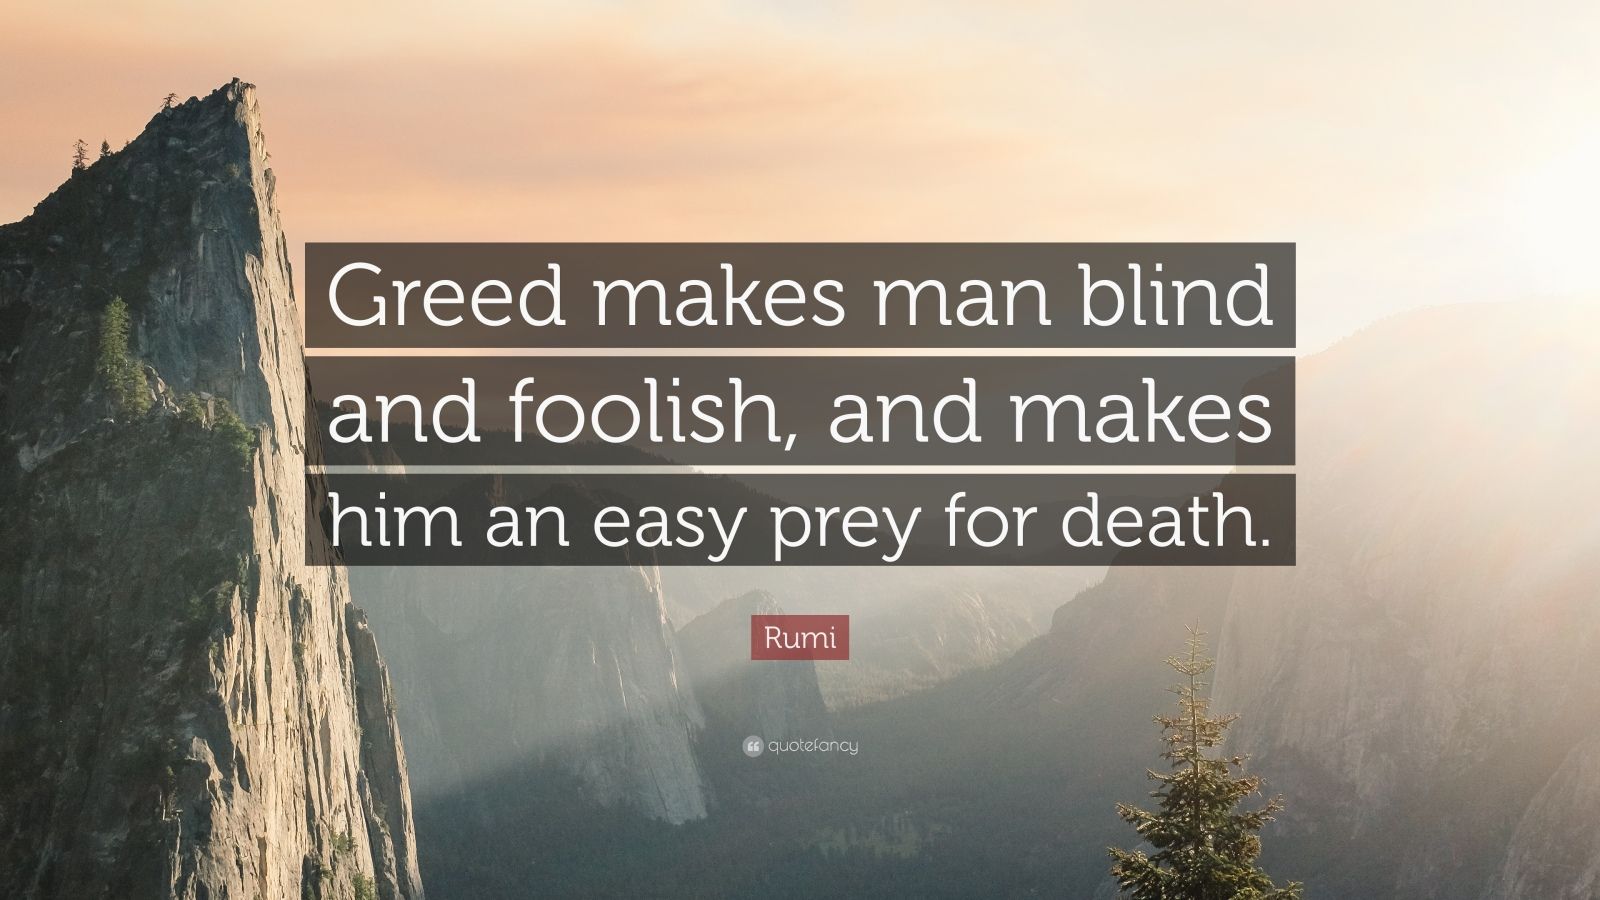 Rumi Quote: "Greed makes man blind and foolish, and makes him an easy prey for death." (12 ...